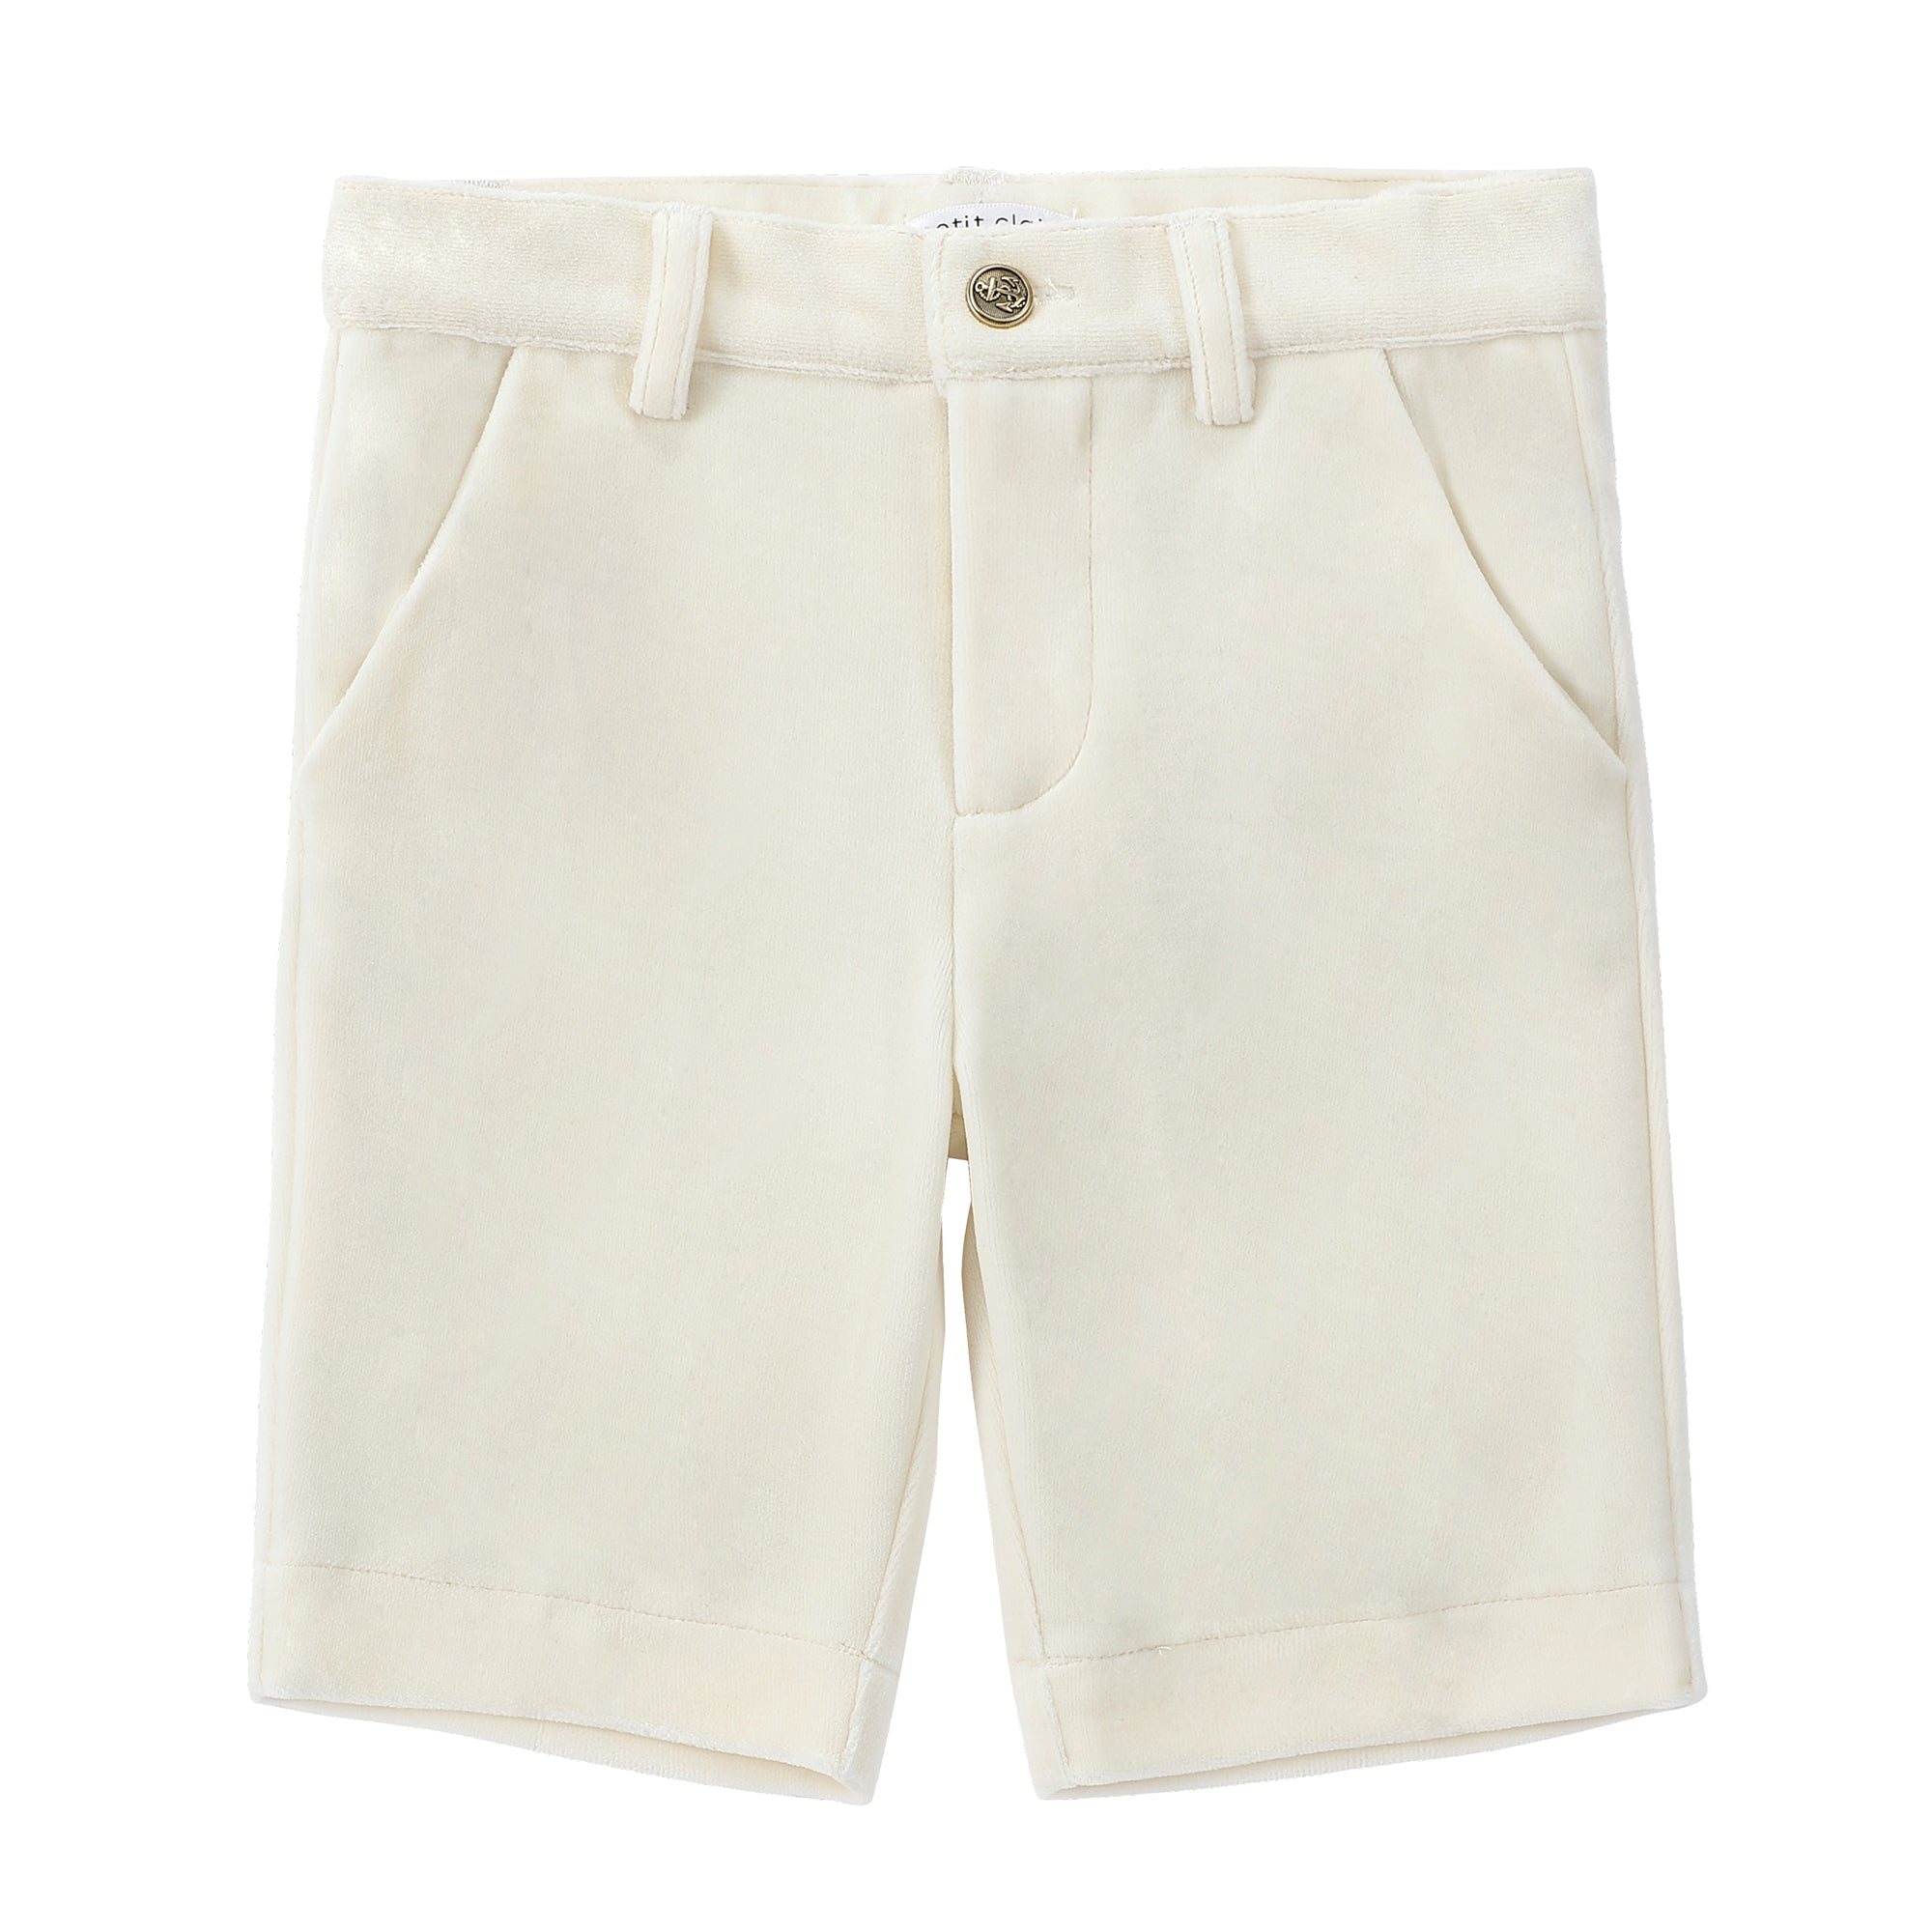 Ivory Velvet Shorts With Gold Buttons